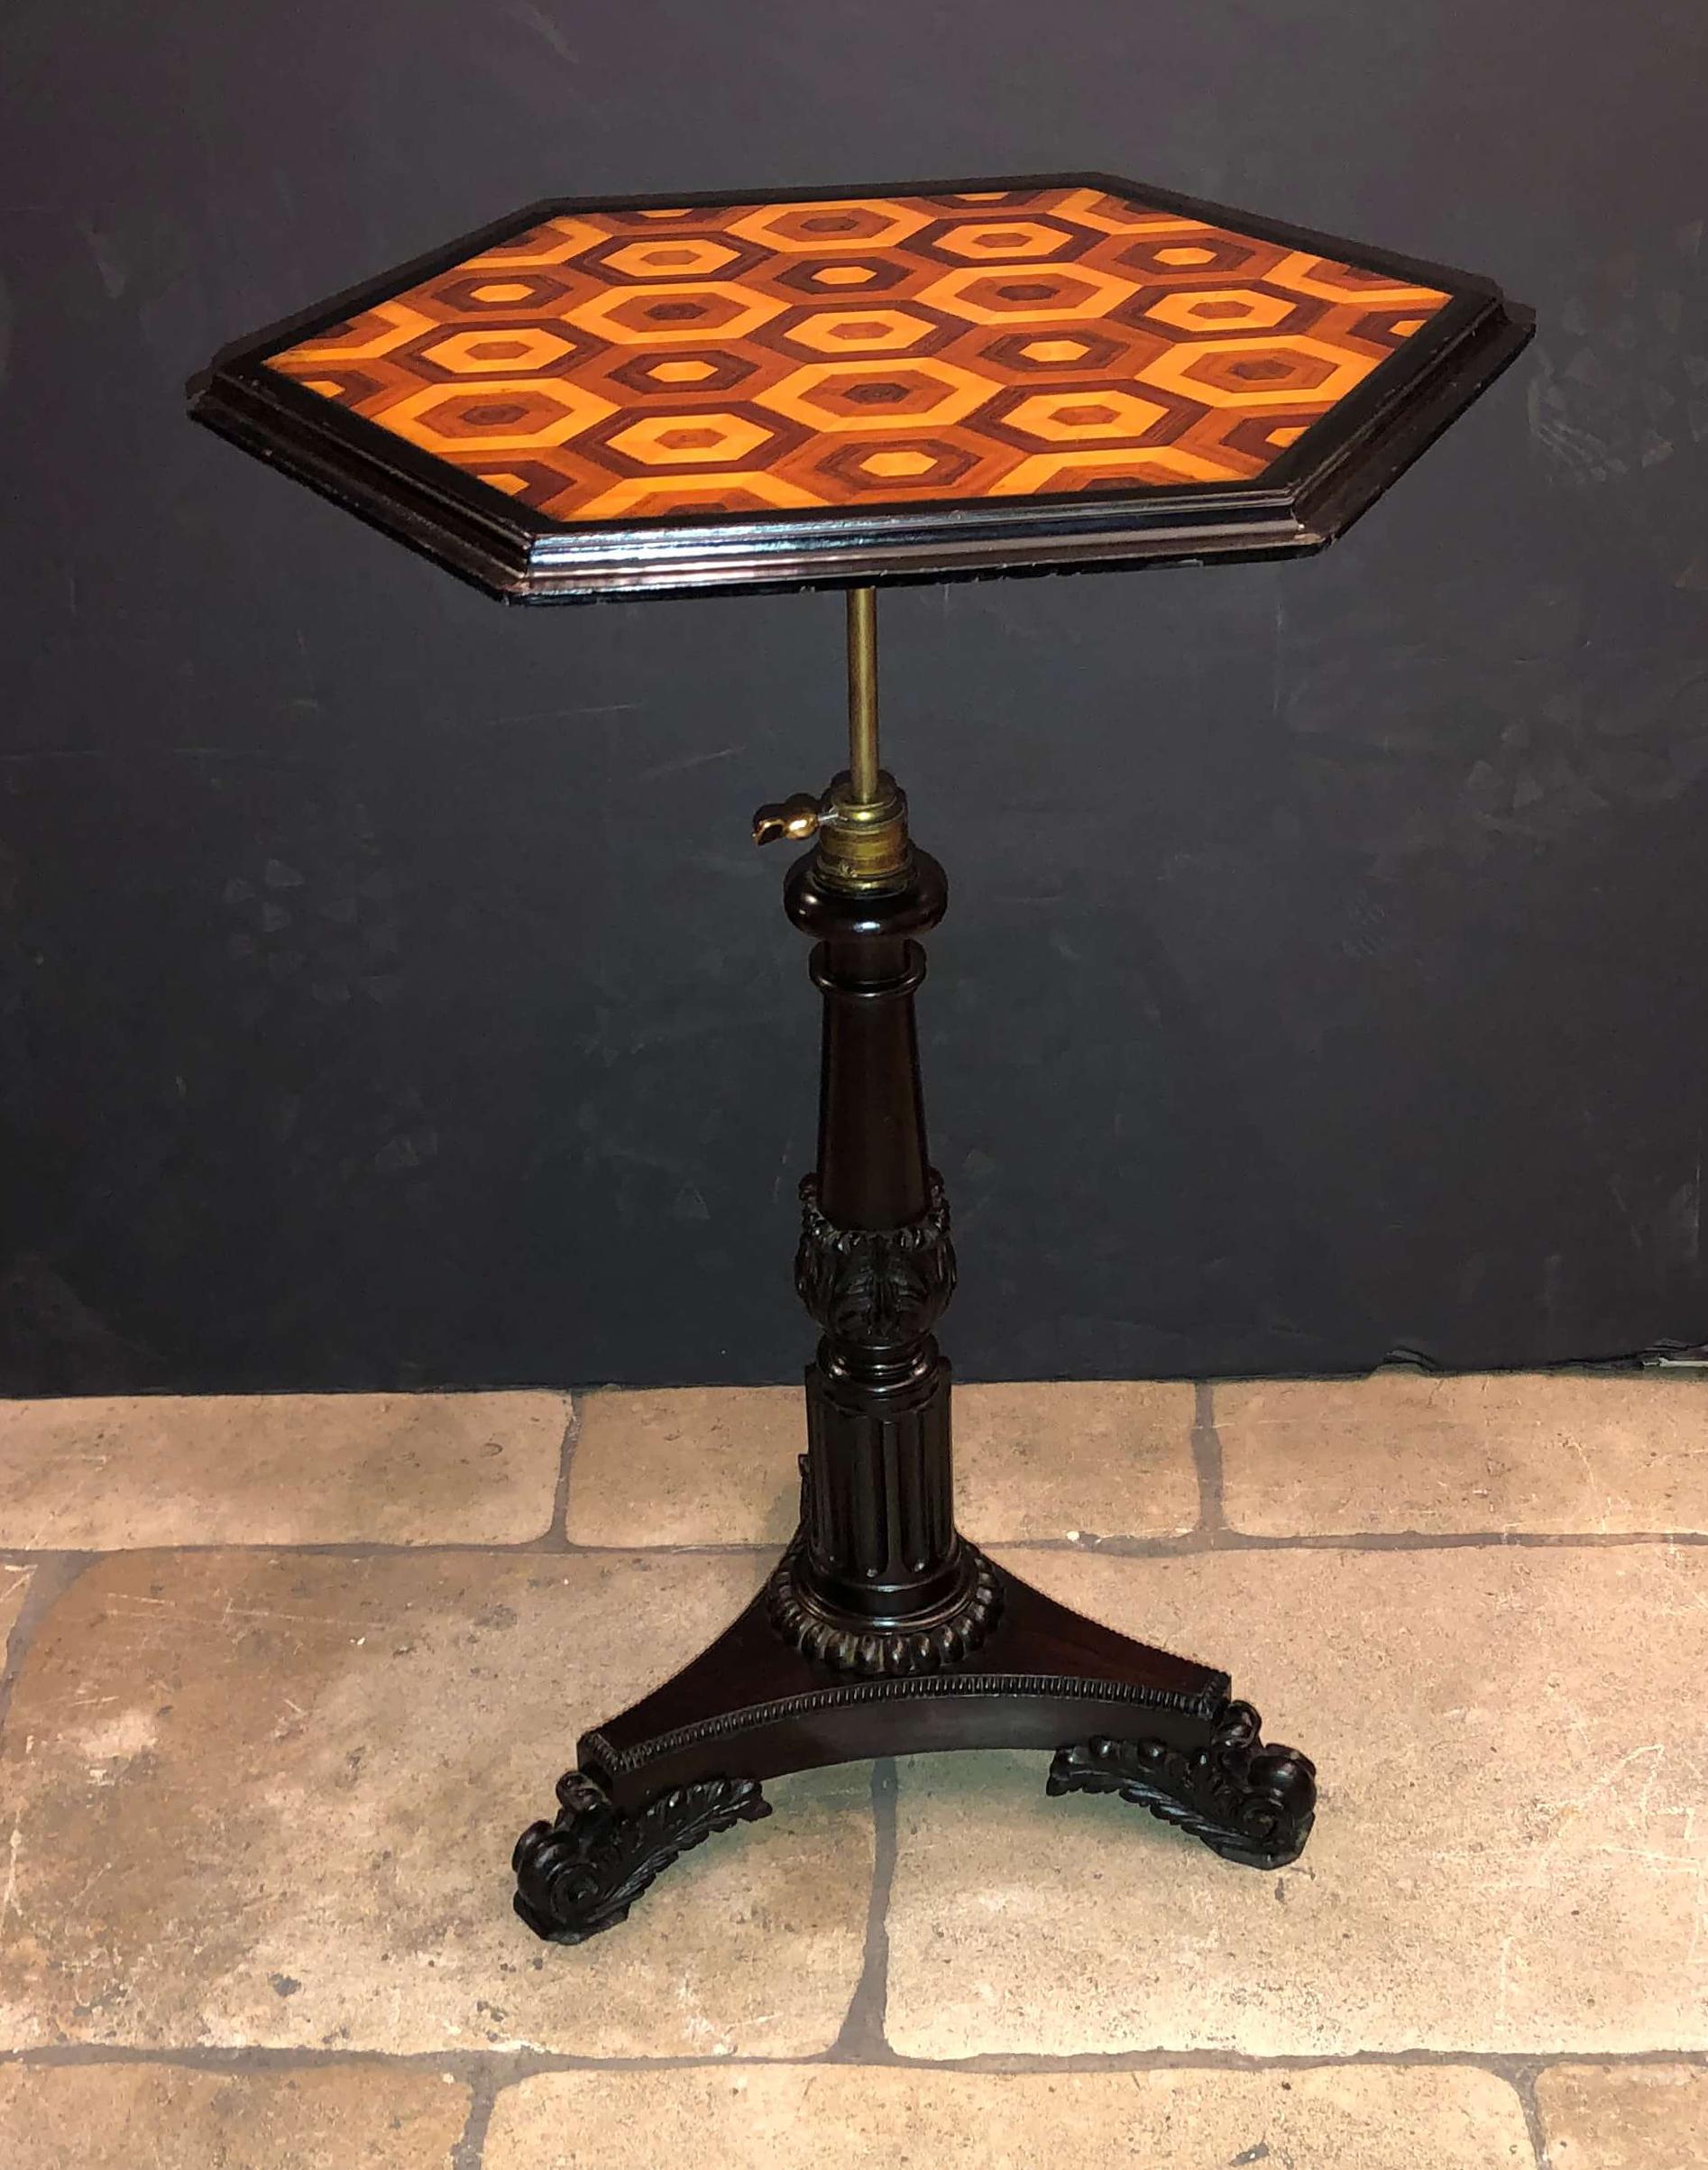 Late Regency adjustable height stand with a parquetry inlaid hexagonal top, brass adjustable supports on a carved acanthus wrapped winged foot tripartite base.